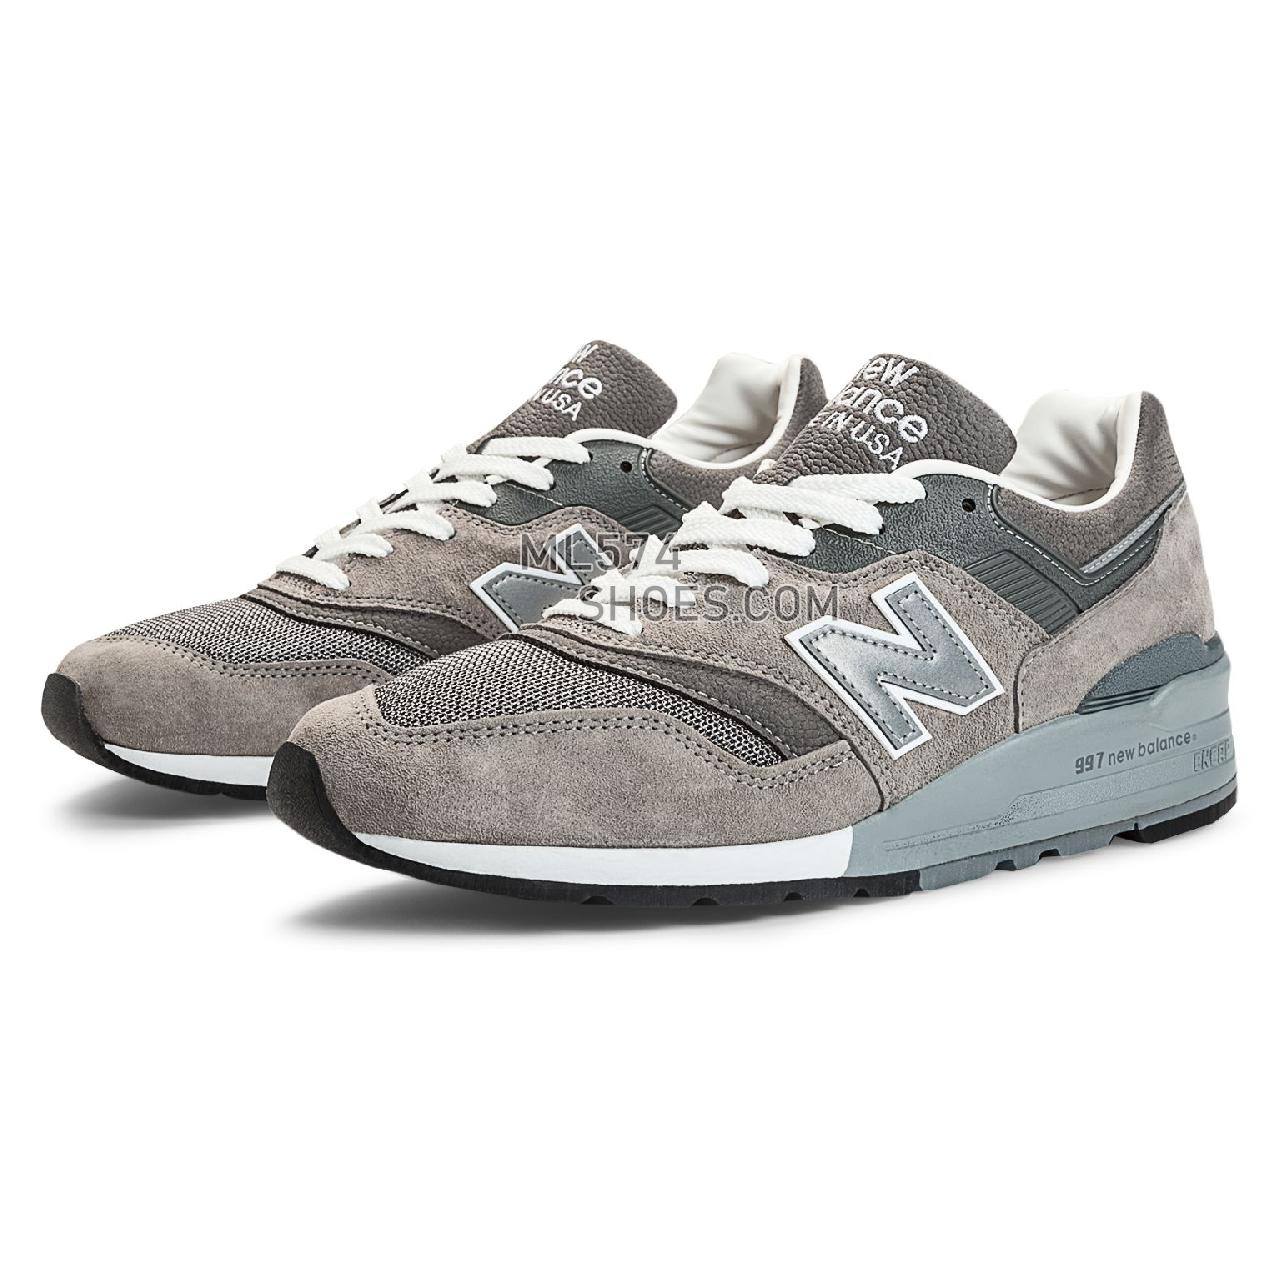 New Balance 997 Made in US - Men's Made in USA And UK Sneakers - Grey with White - M997GY